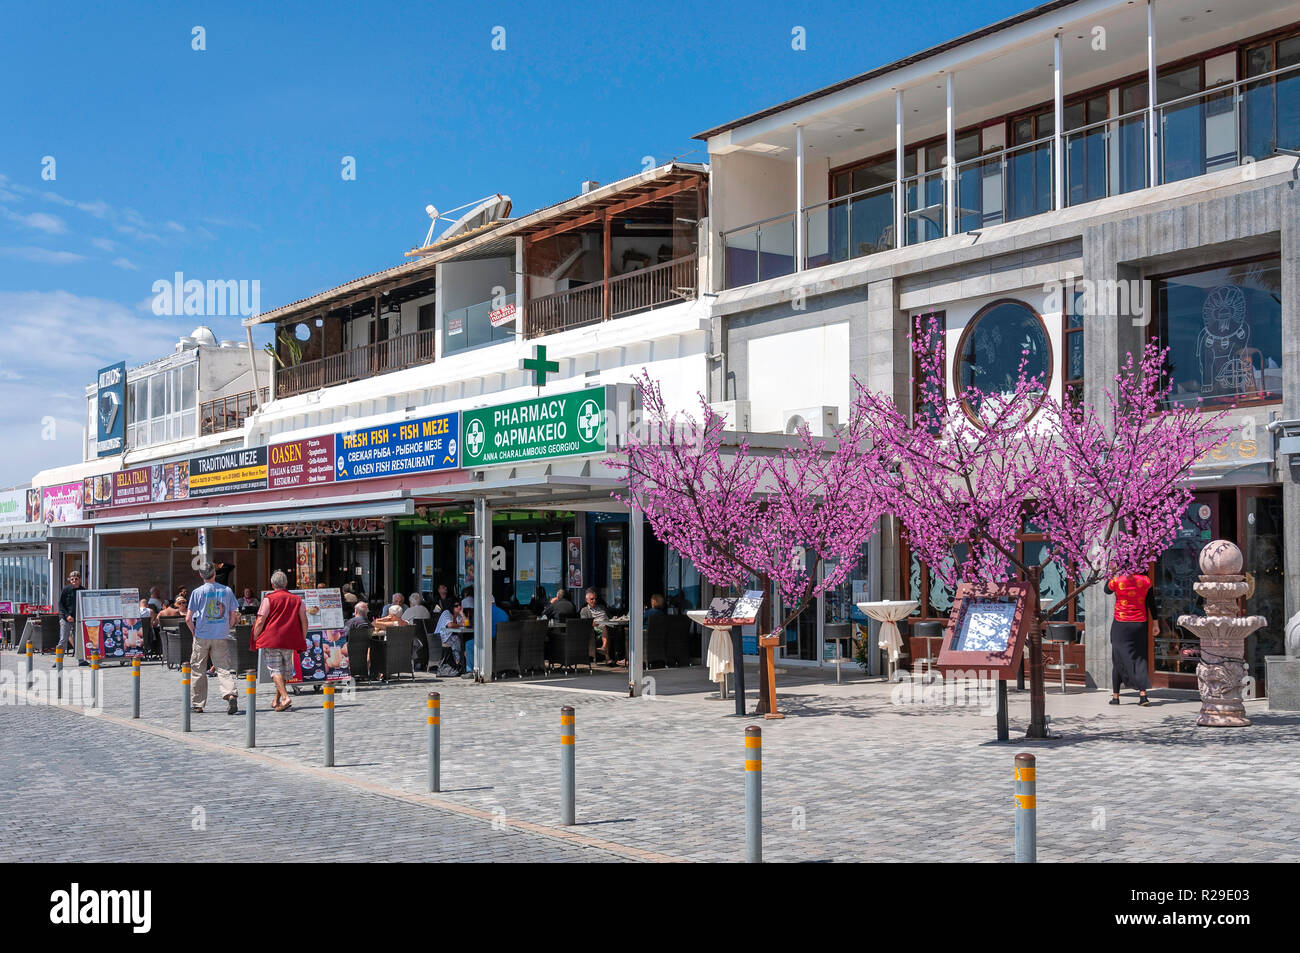 Seafront shops and restaurants, Poseidonos Avenue, Paphos (Pafos), Pafos District, Republic of Cyprus Stock Photo